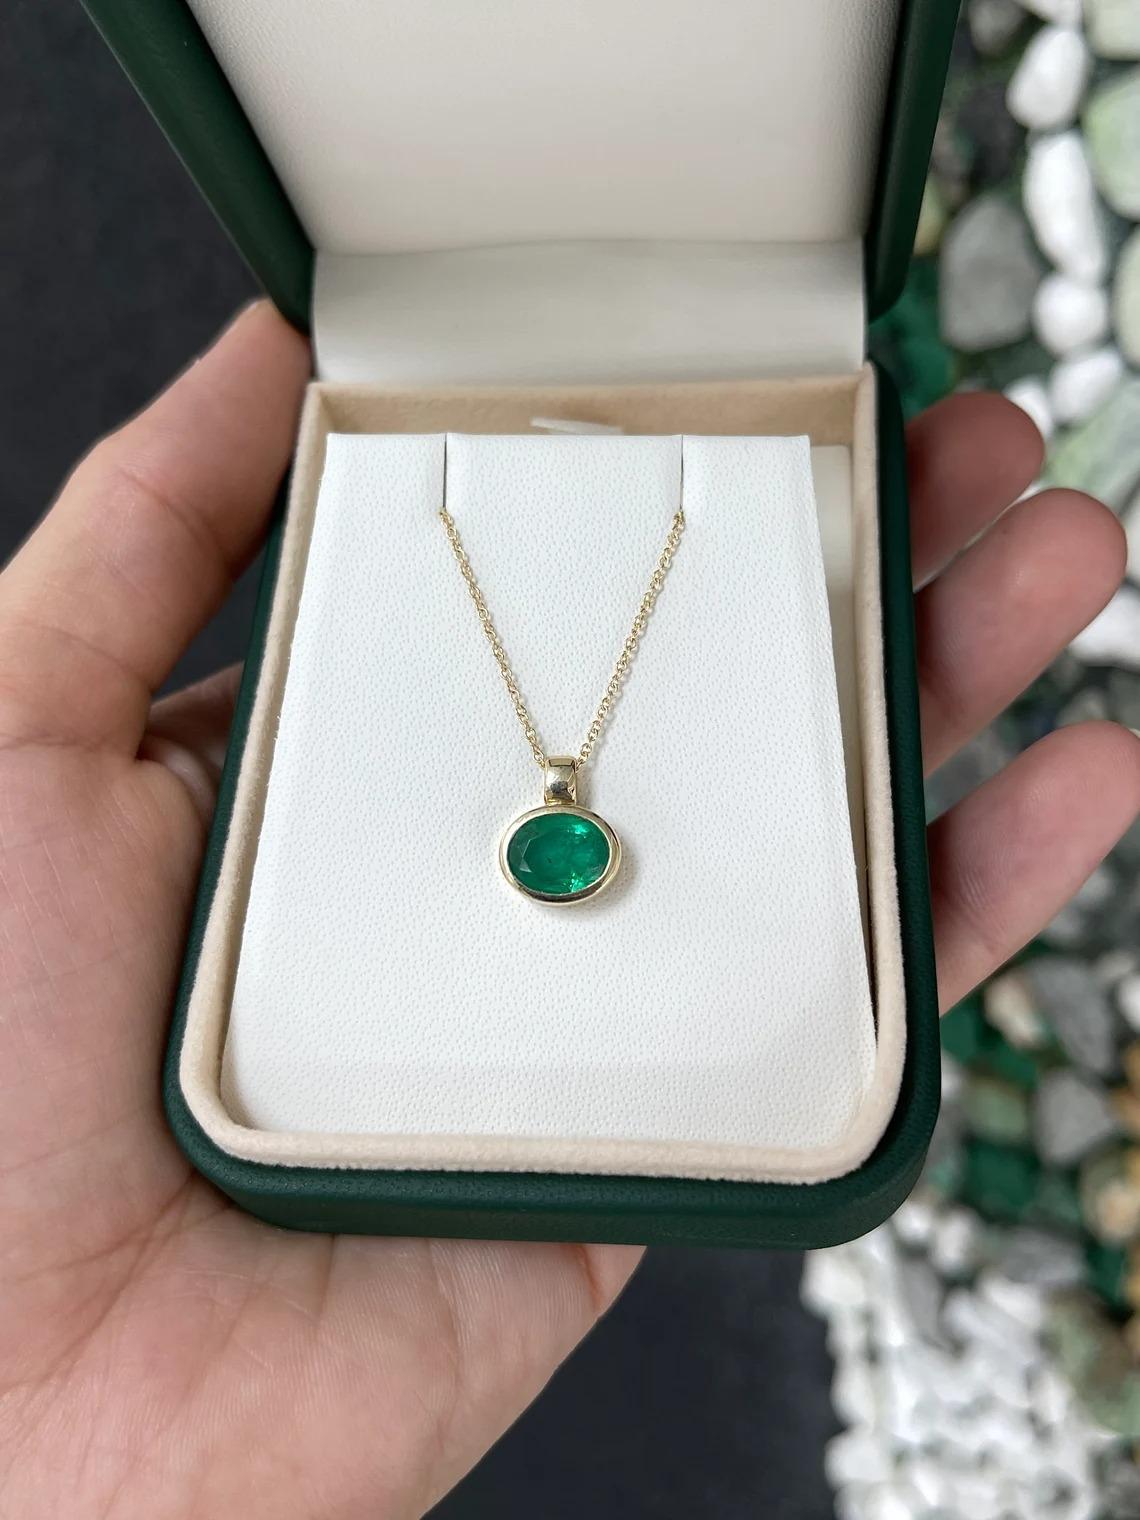 1.14ct 14K Natural Dark Green Oval Cut Solitaire Gold Bezel Pendant Necklace In New Condition For Sale In Jupiter, FL